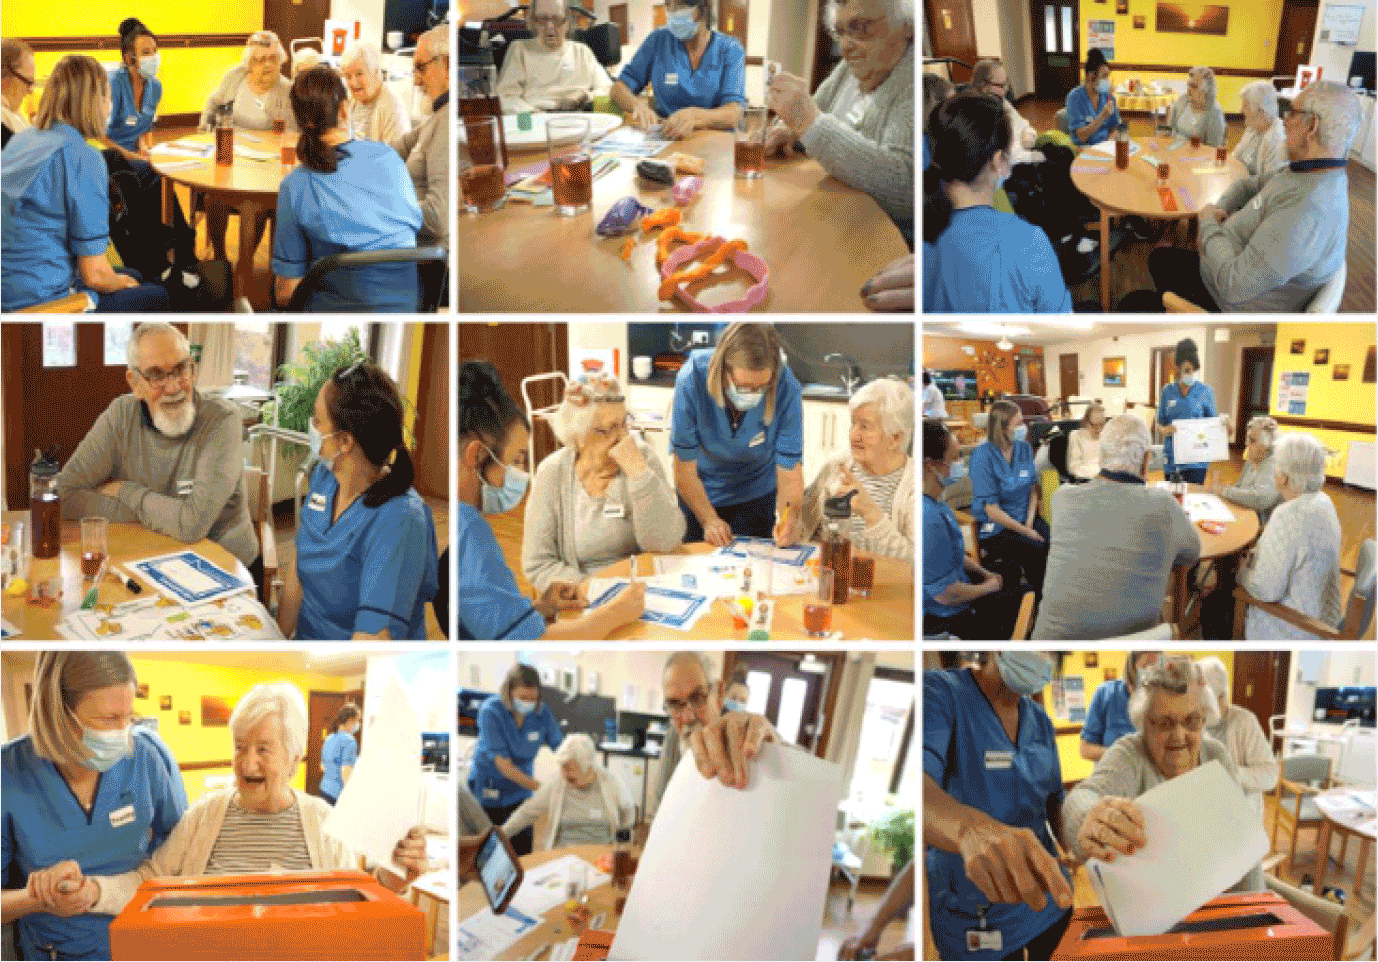 Image showing health care workers engaging with residents in the care home.